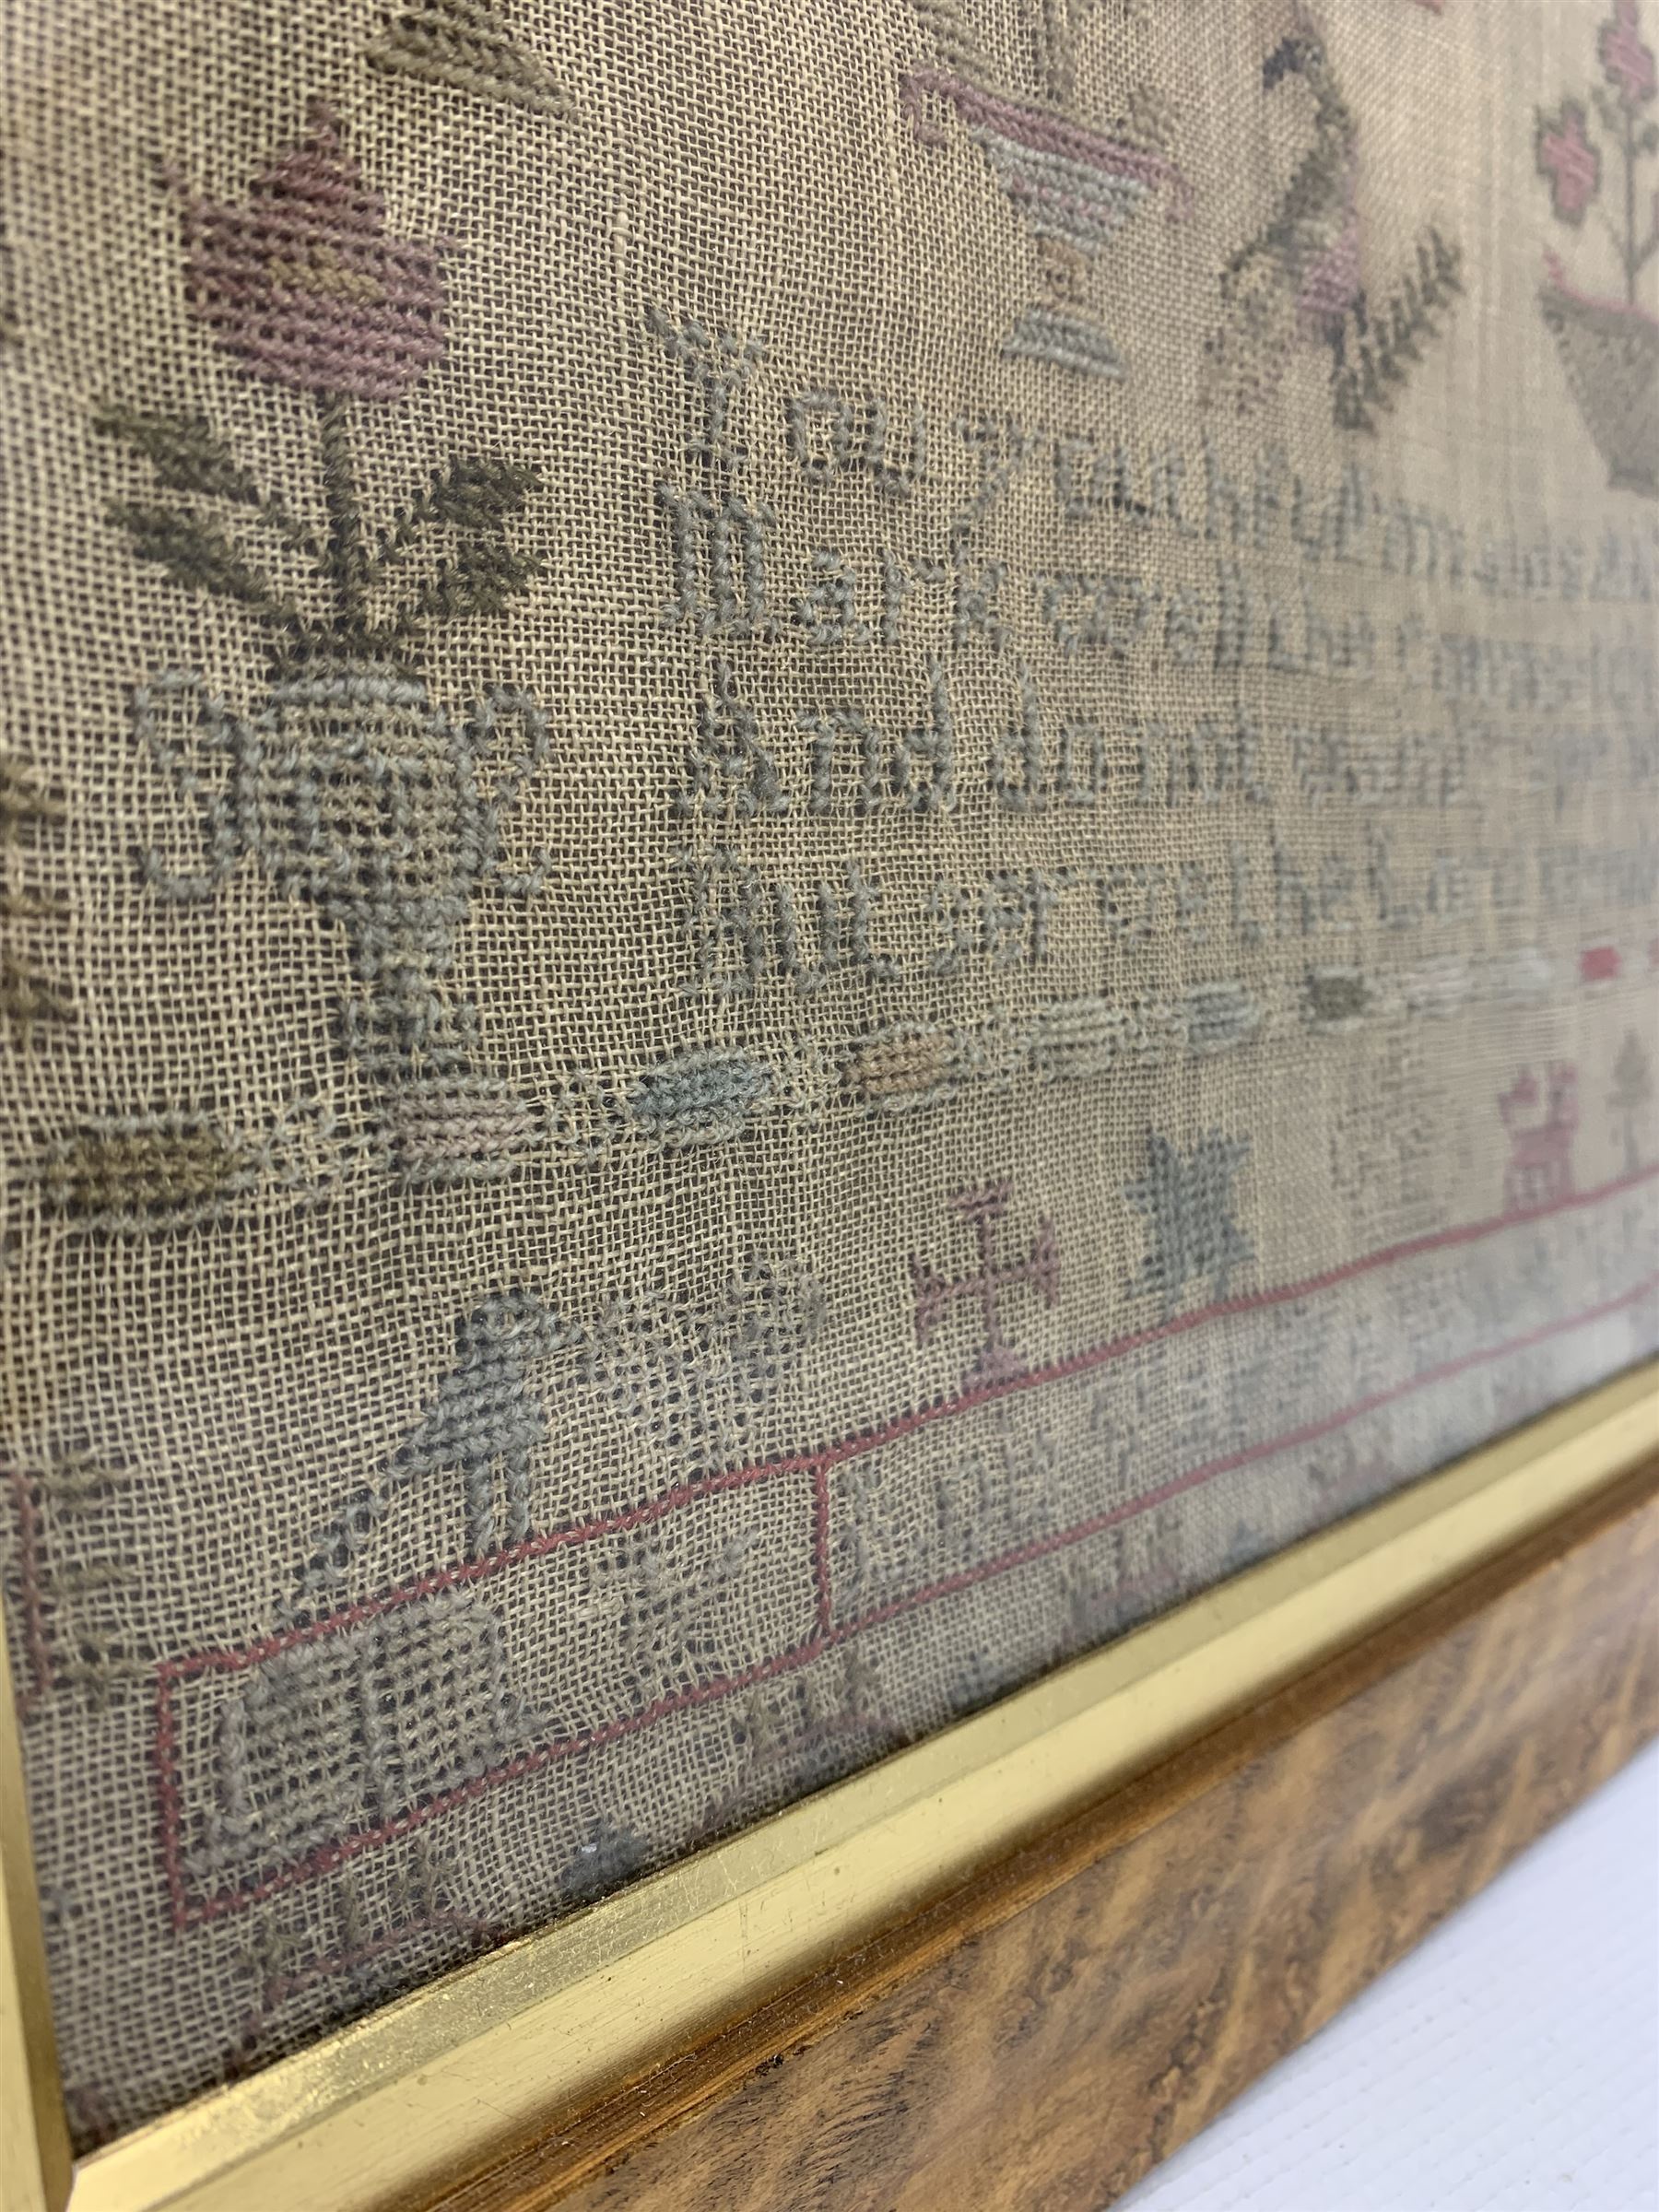 Early Victorian needlework sampler by Lois Vary - Image 3 of 4